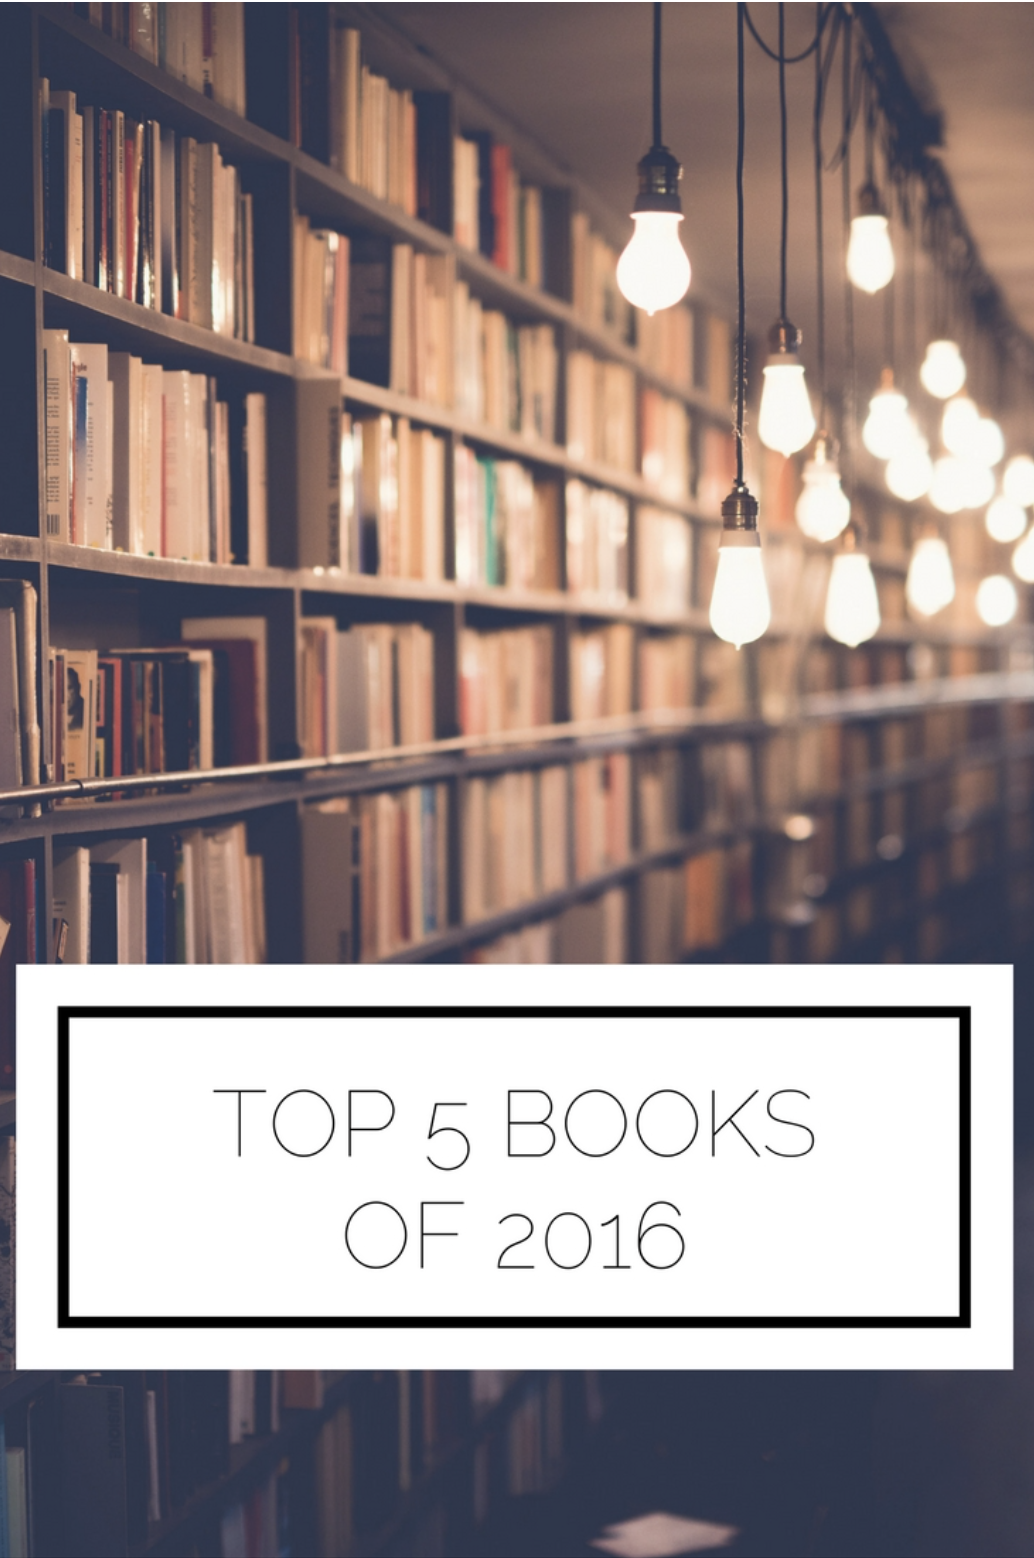 Top 5 Books of 2016